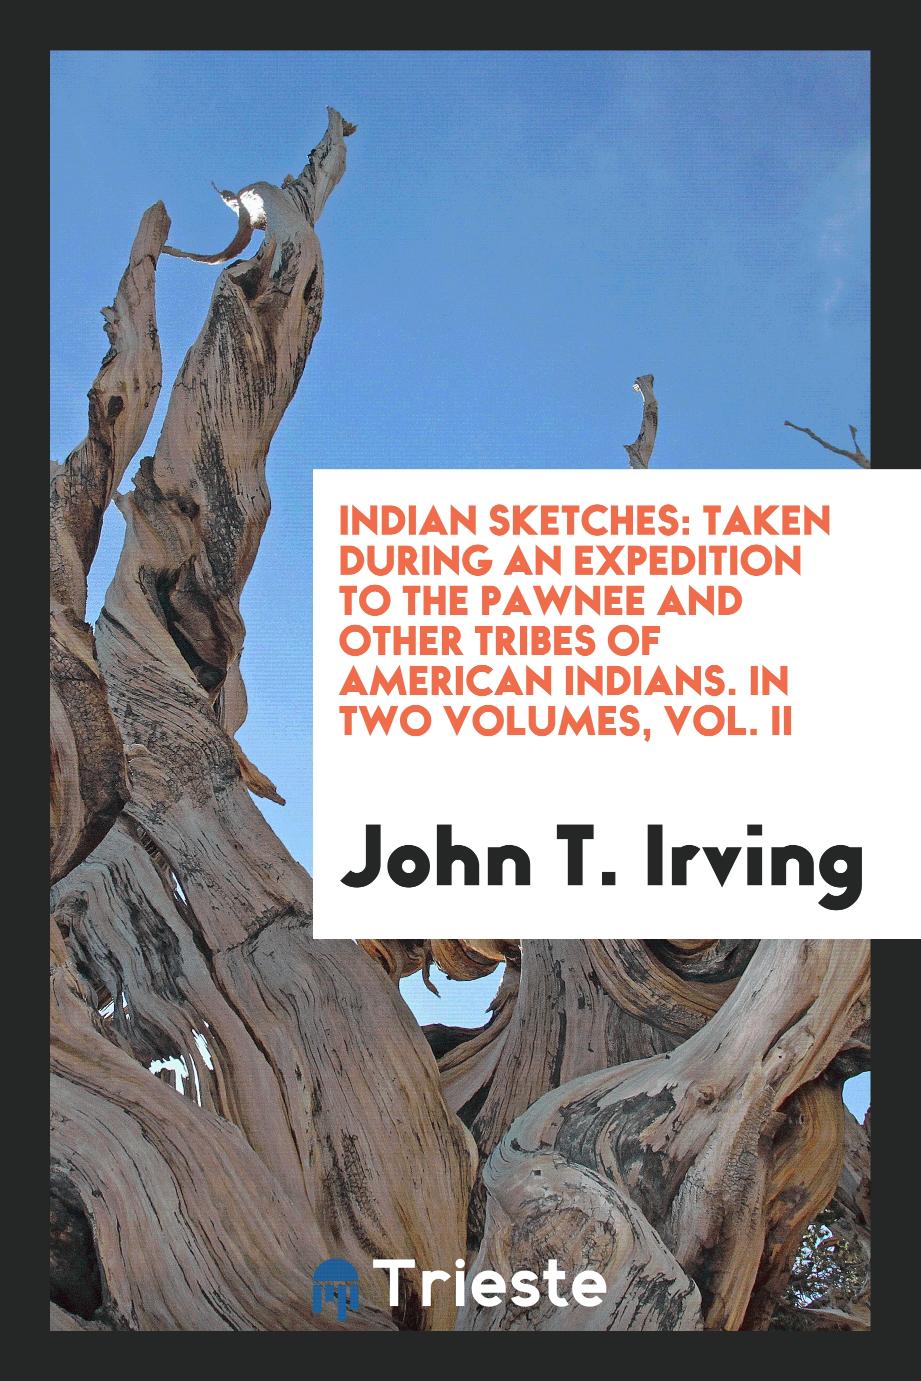 Indian Sketches: Taken During an Expedition to the Pawnee and Other Tribes of American Indians. In Two Volumes, Vol. II